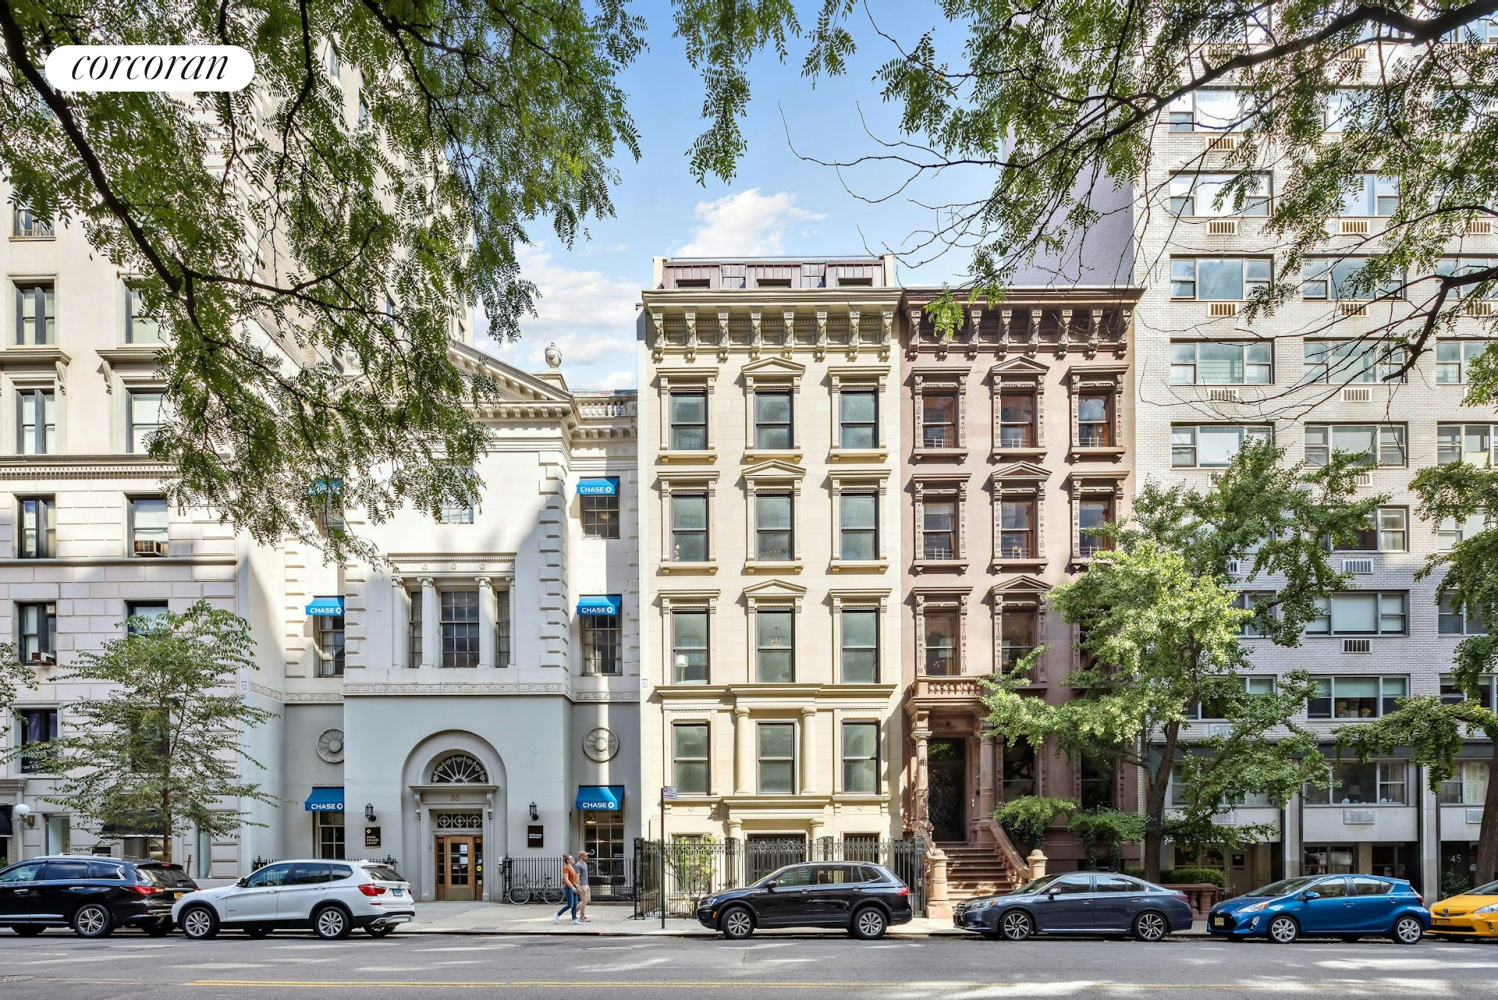 39 East 72nd Street Mais, Lenox Hill, Upper East Side, NYC - 4 Bedrooms  
4.5 Bathrooms  
9 Rooms - 